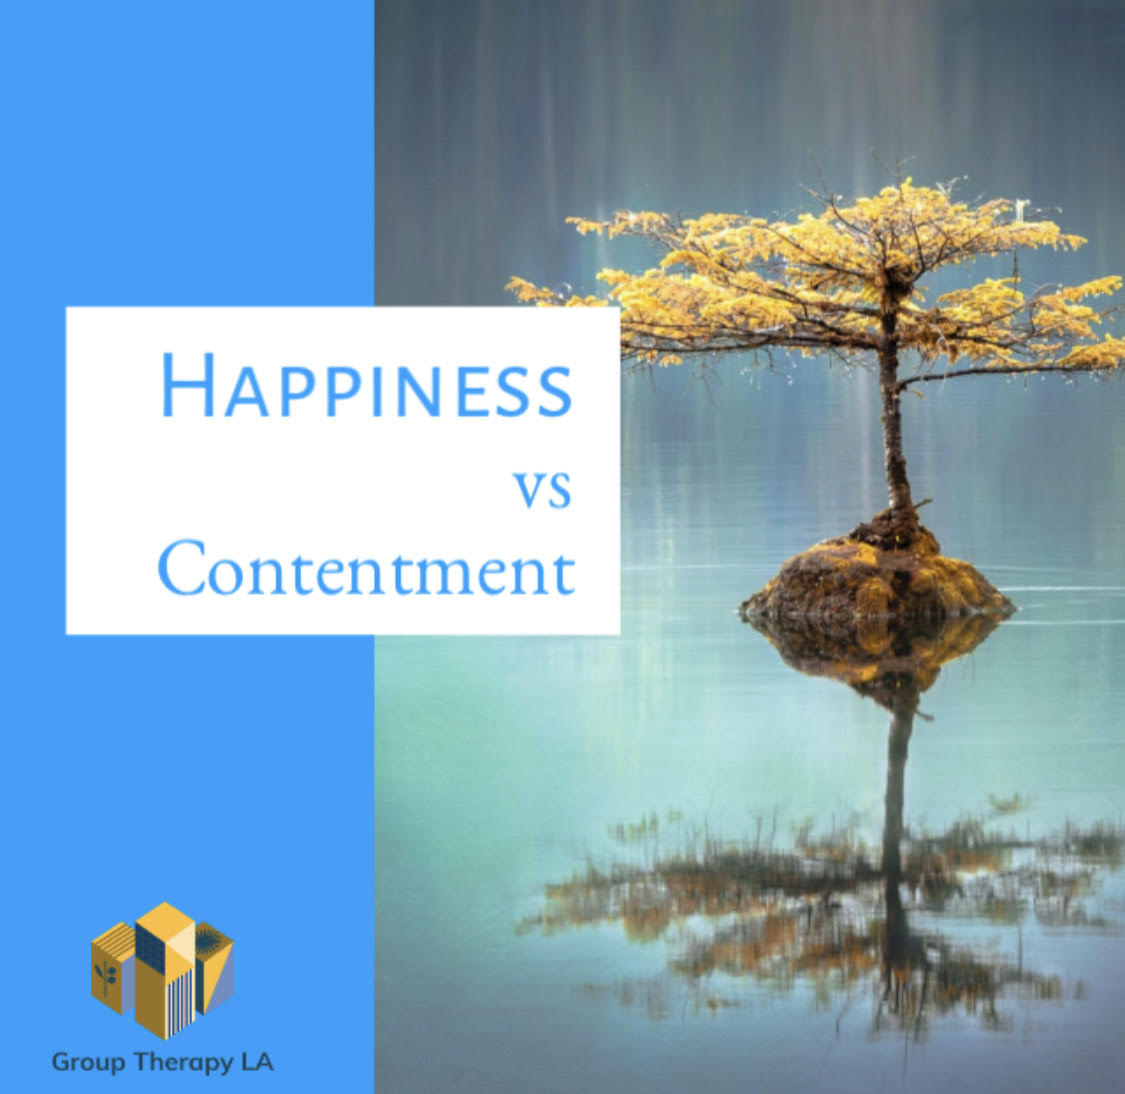 Happiness vs Contentment